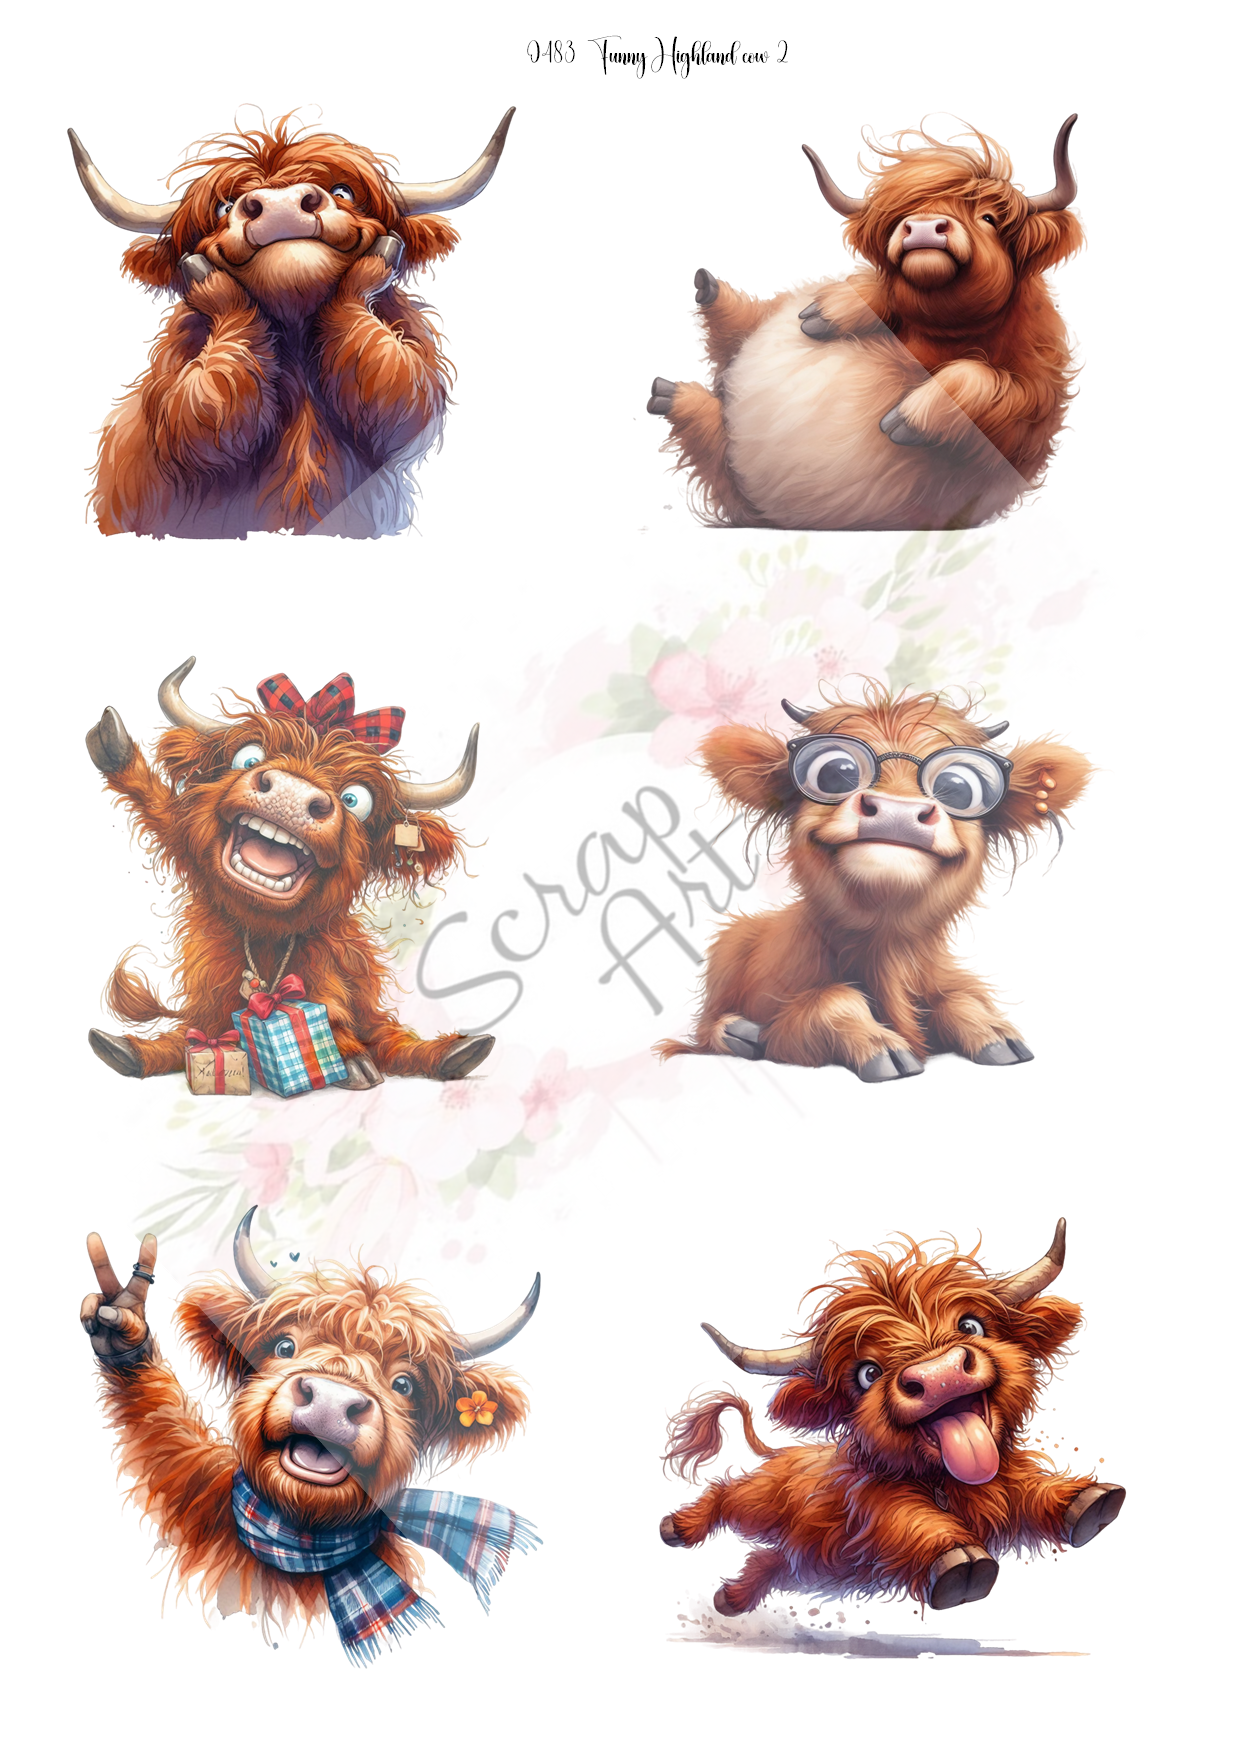 0483 Funny highland cow 2